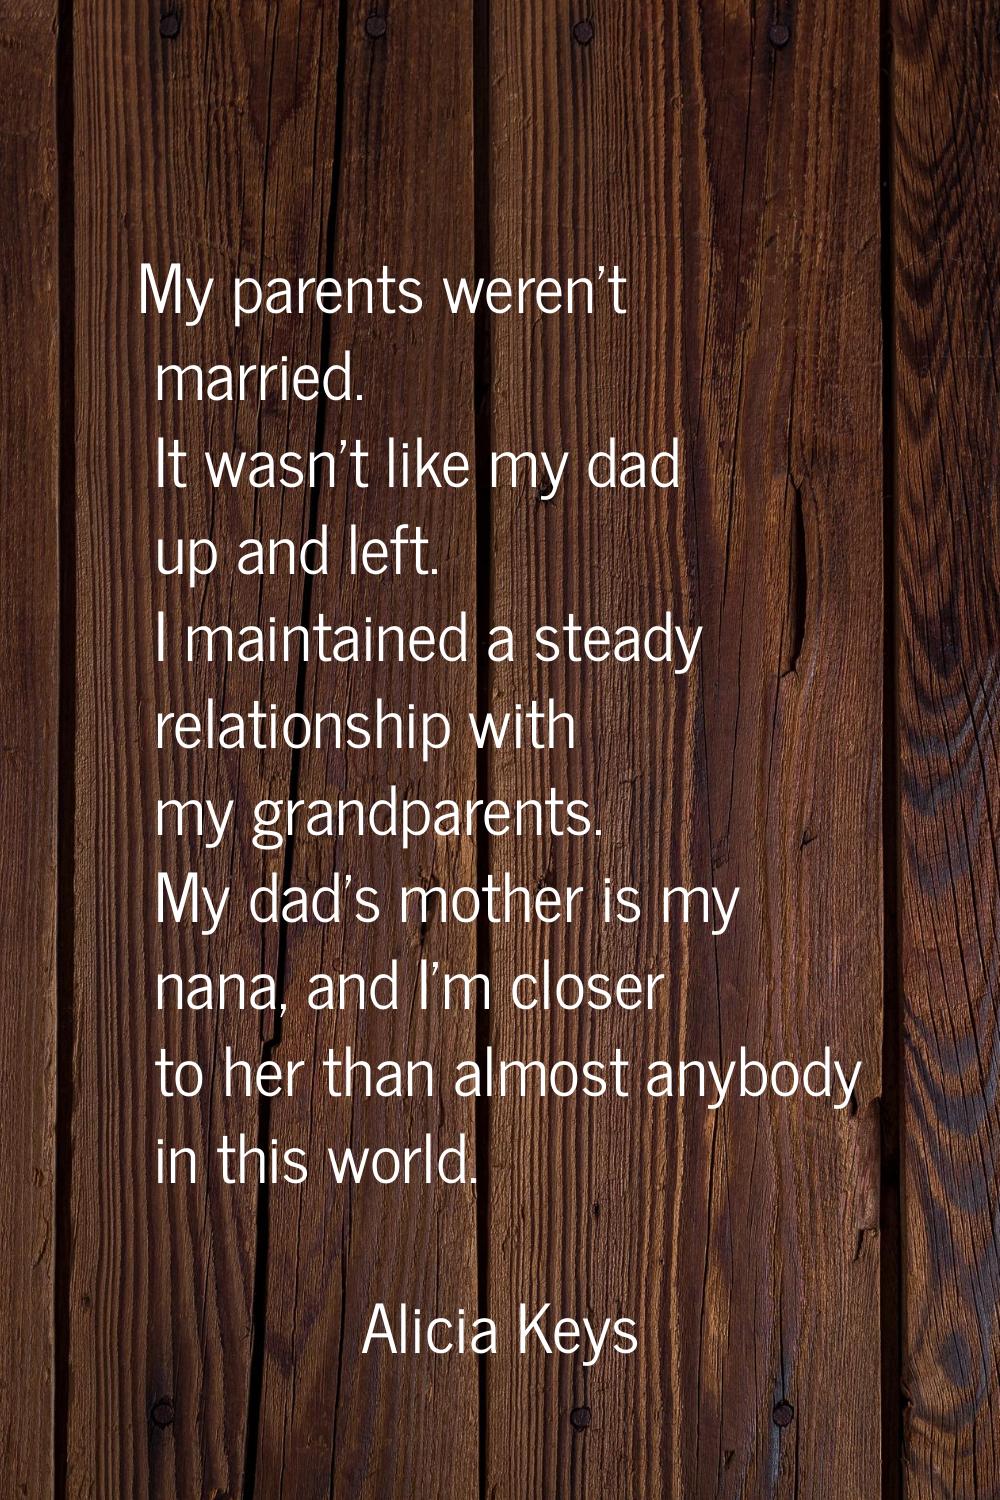 My parents weren't married. It wasn't like my dad up and left. I maintained a steady relationship w